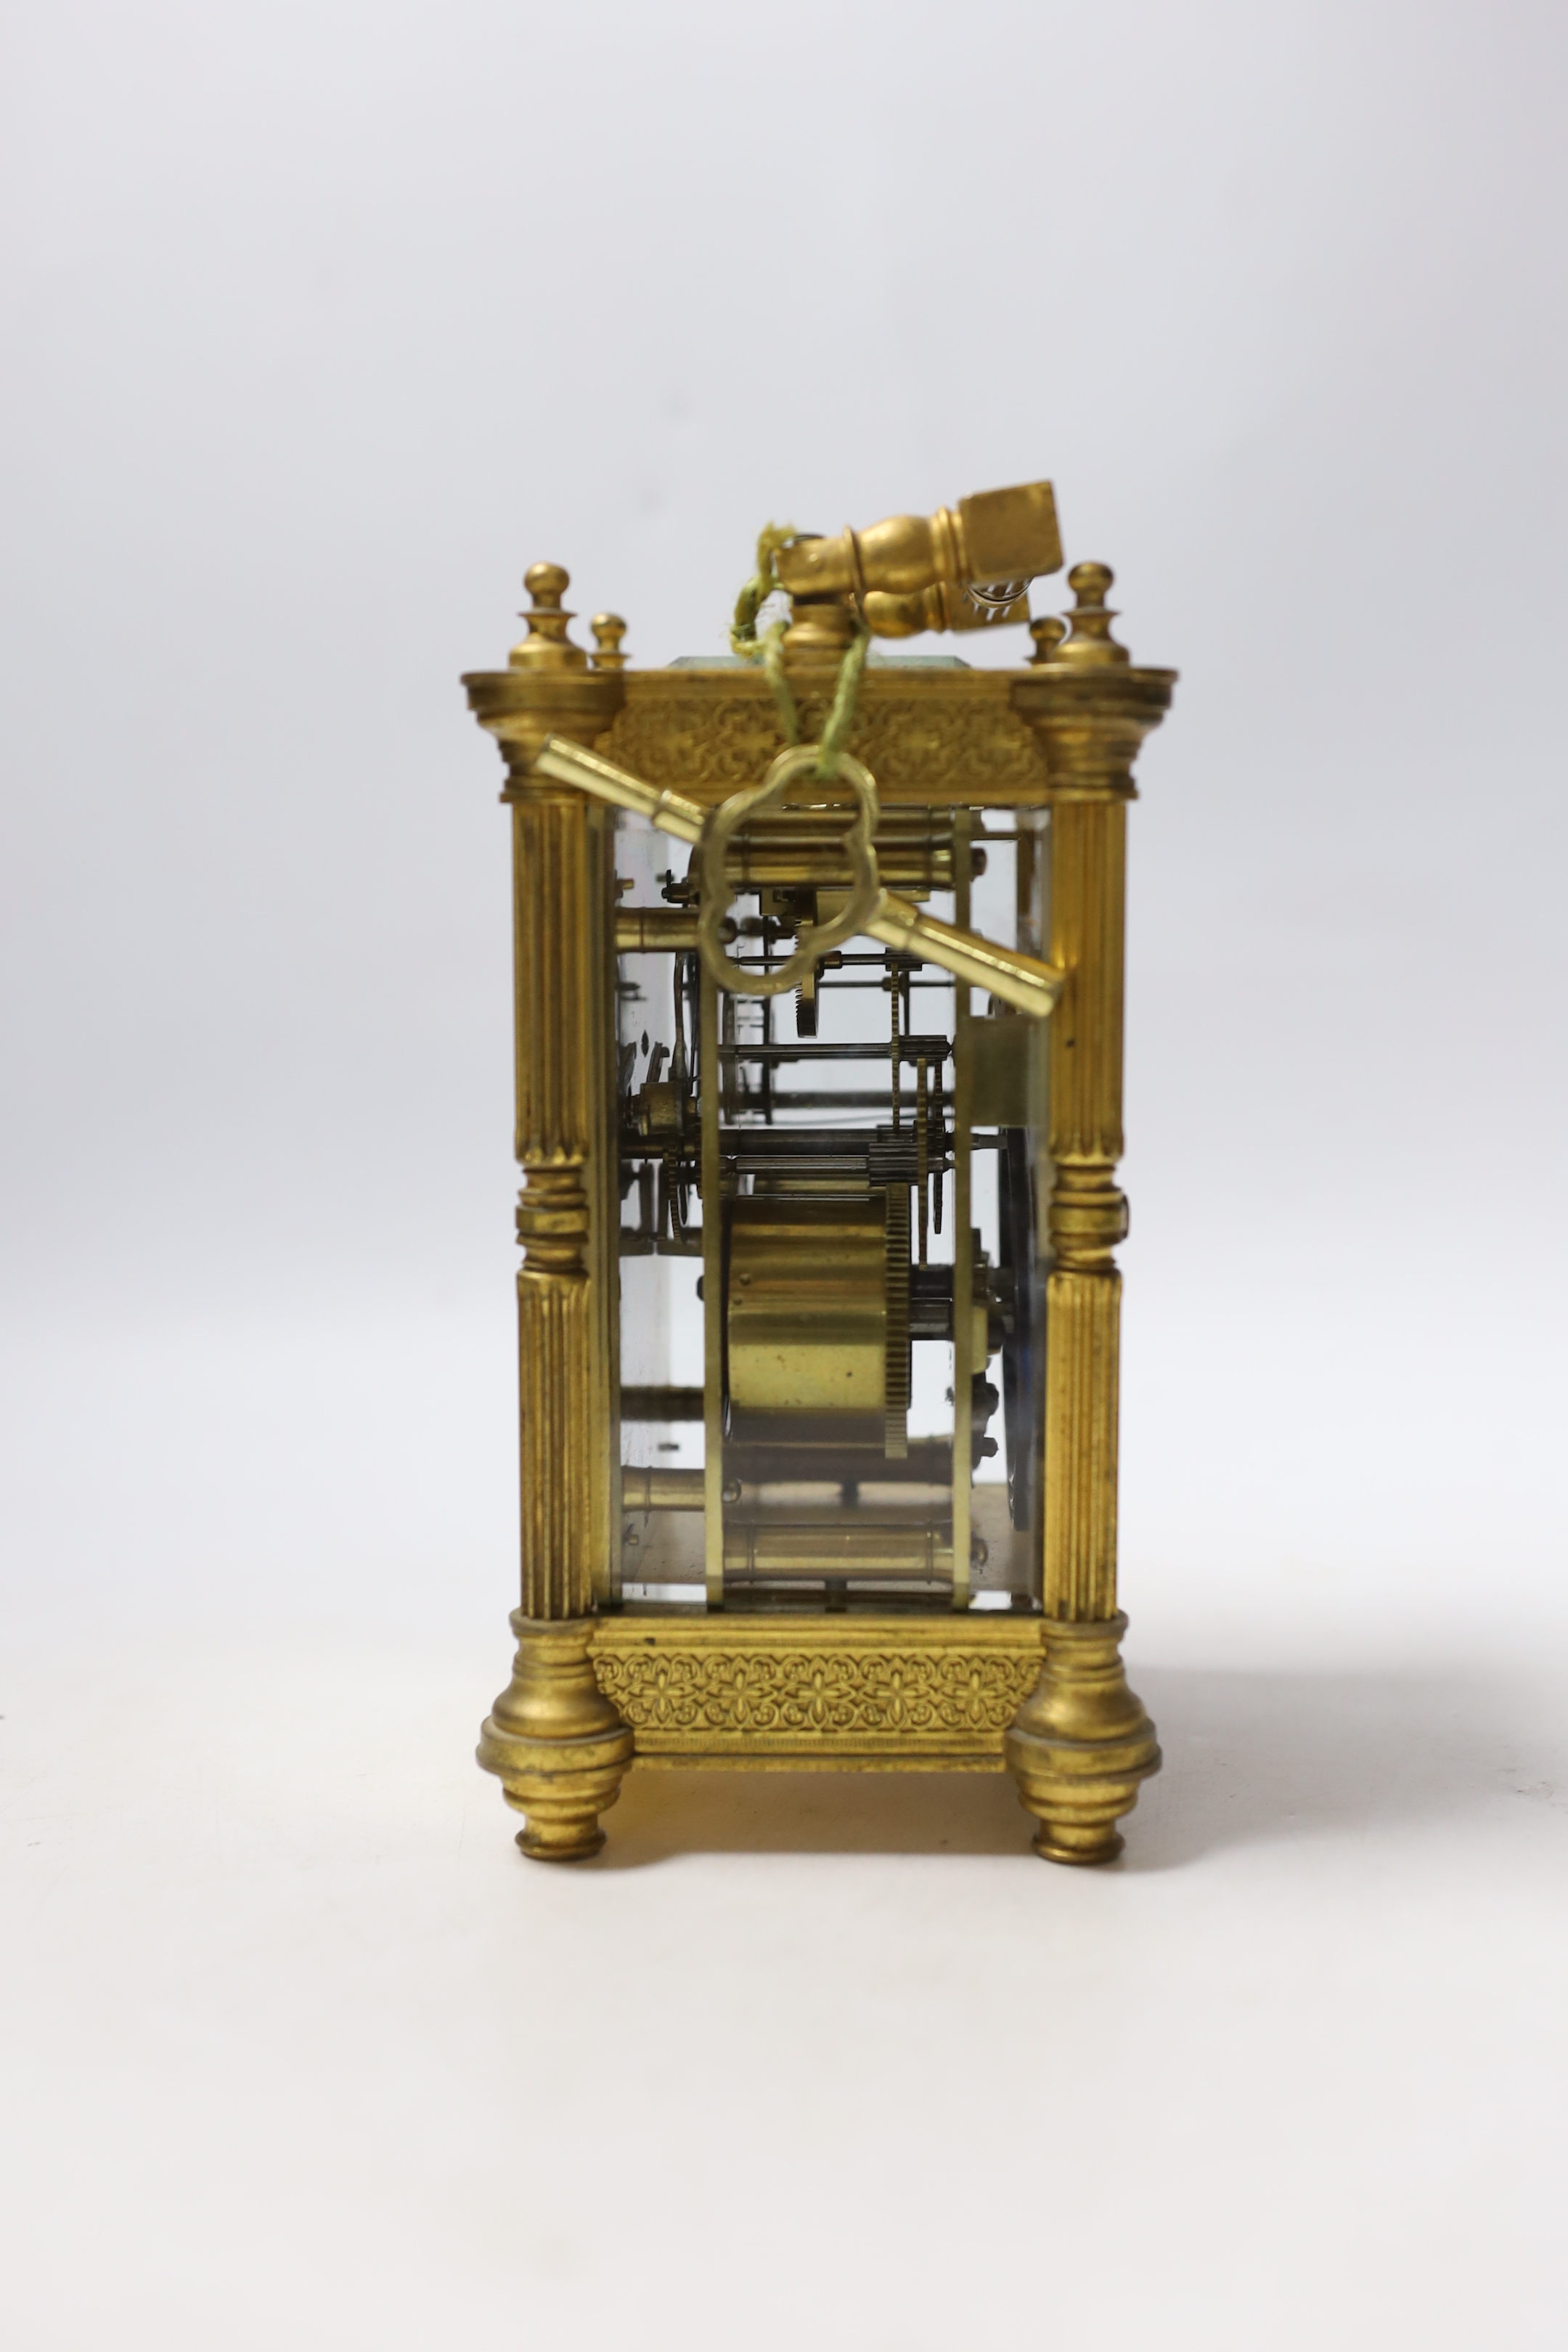 An Edwardian carriage timepiece with blind fretwork decoration, 16.5cm